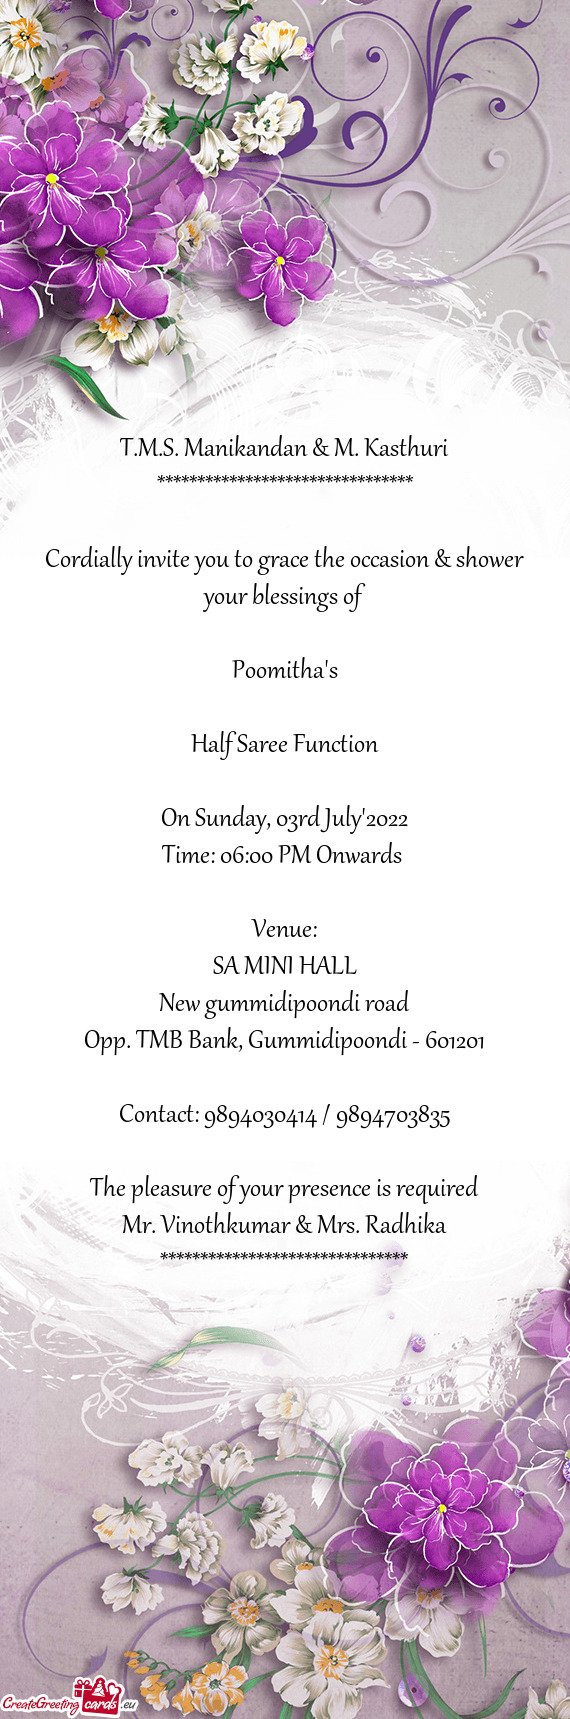 Cordially invite you to grace the occasion & shower your blessings of